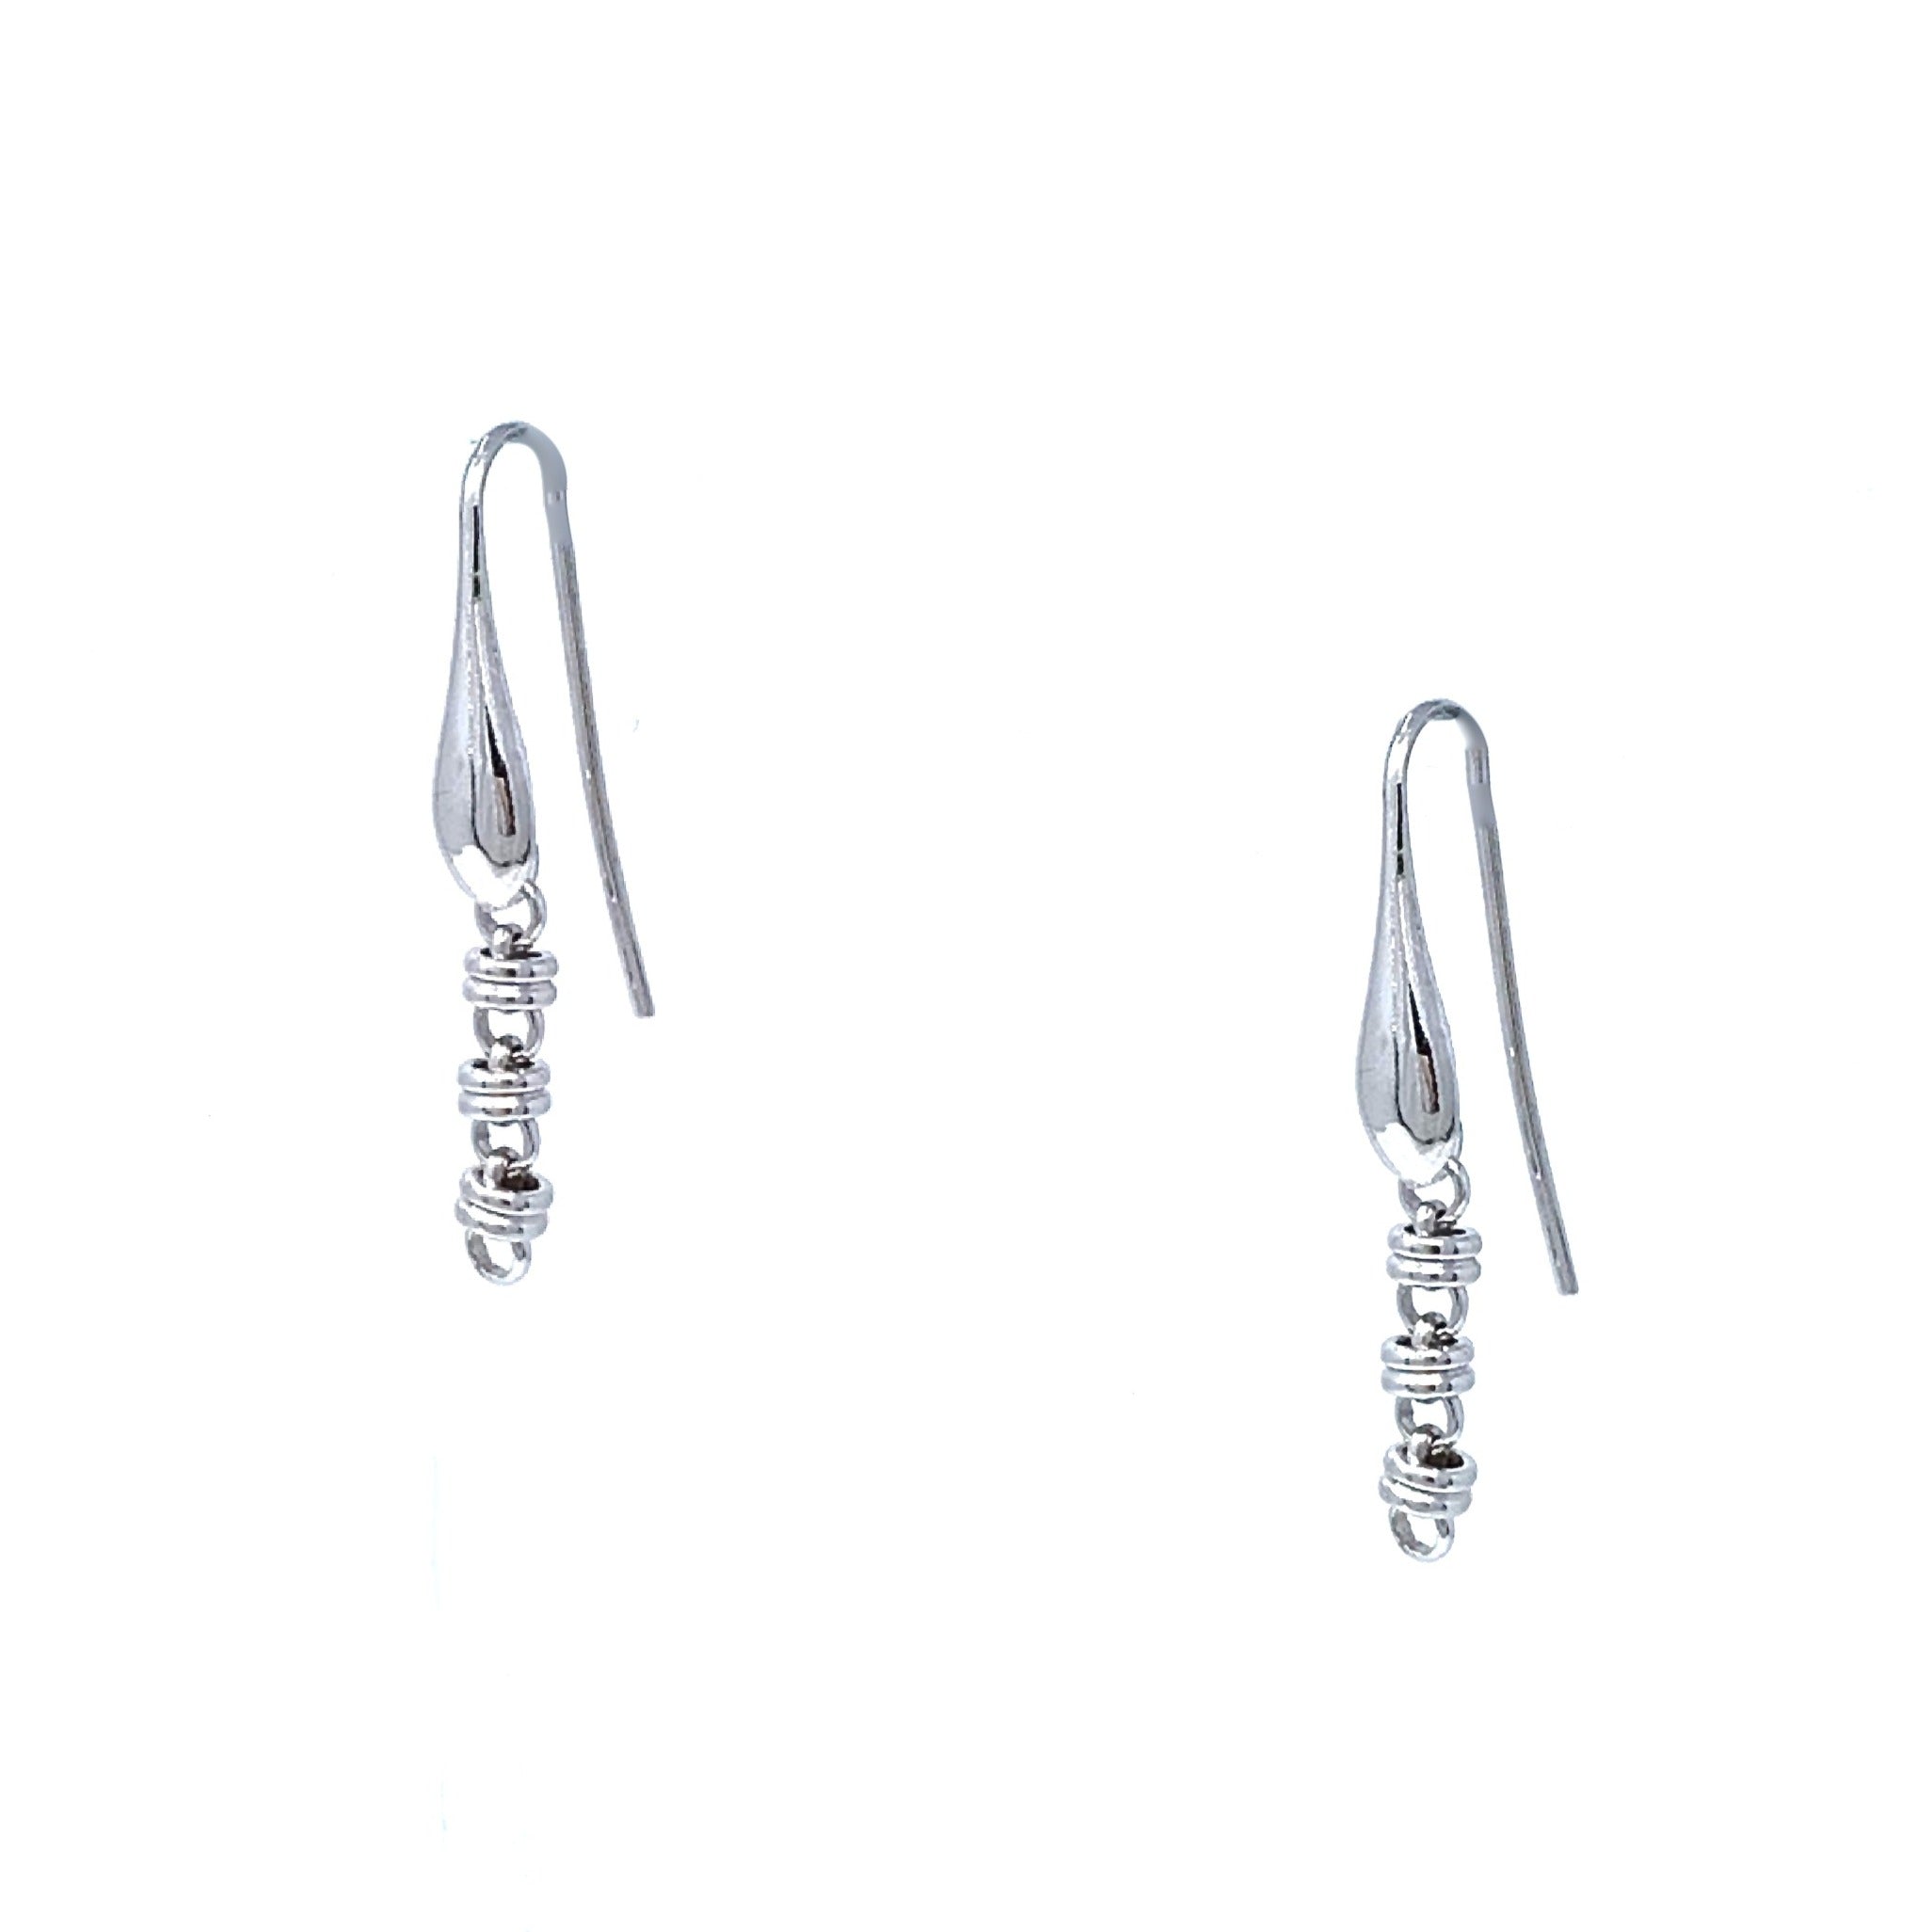 A closeup of silver chain earrings designed and hand-crafted by DelBrenna Italian Jewelers in Tuscany. The earrings are designed based on the iconic Links collection of DelBrenna silver chains, necklaces, rings, and bracelets. 